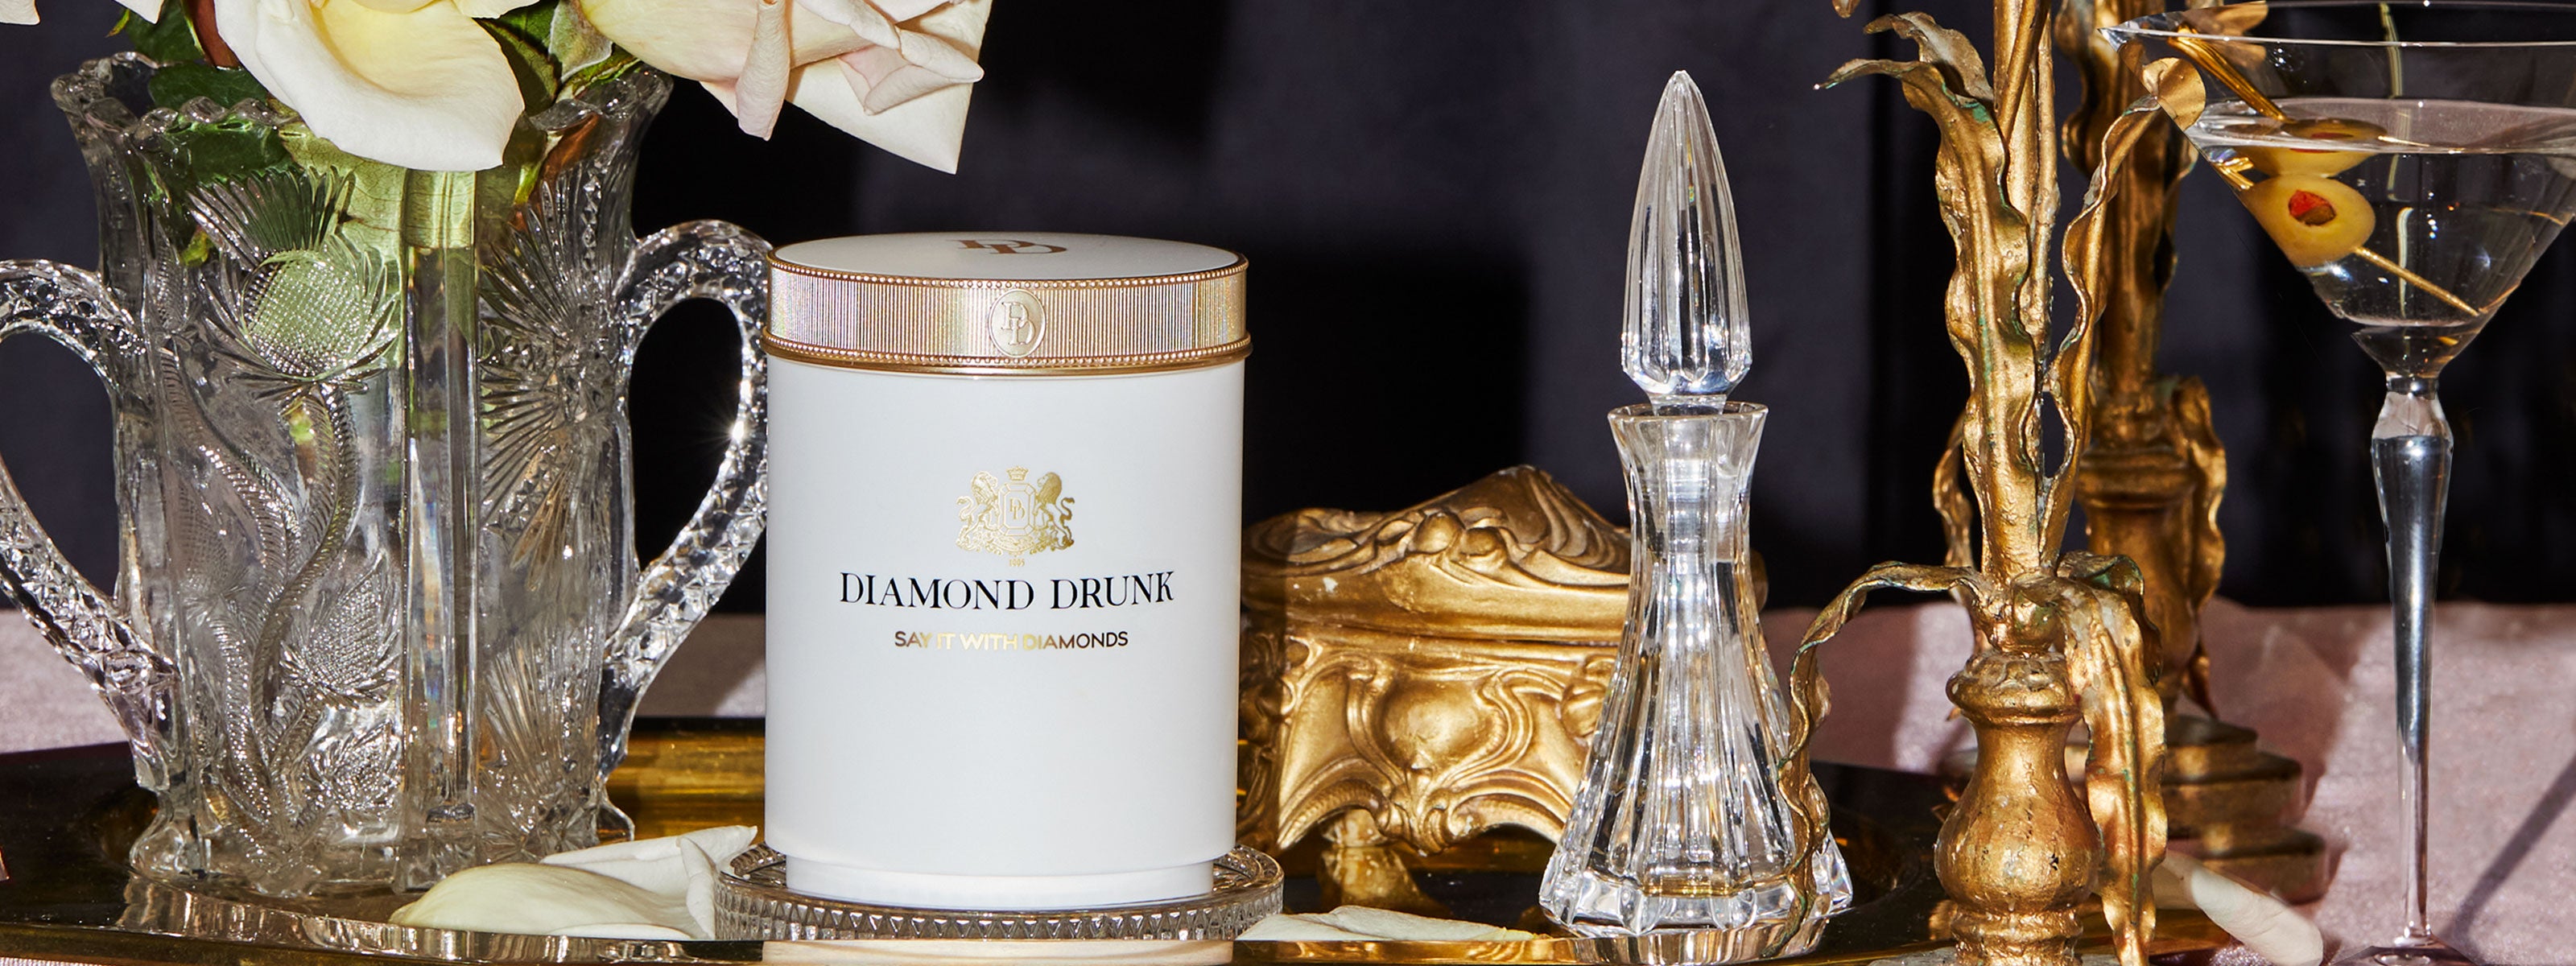 Diamond Drunk Seeks To Disrupt How Consumers Clean Their Jewelry - JCK